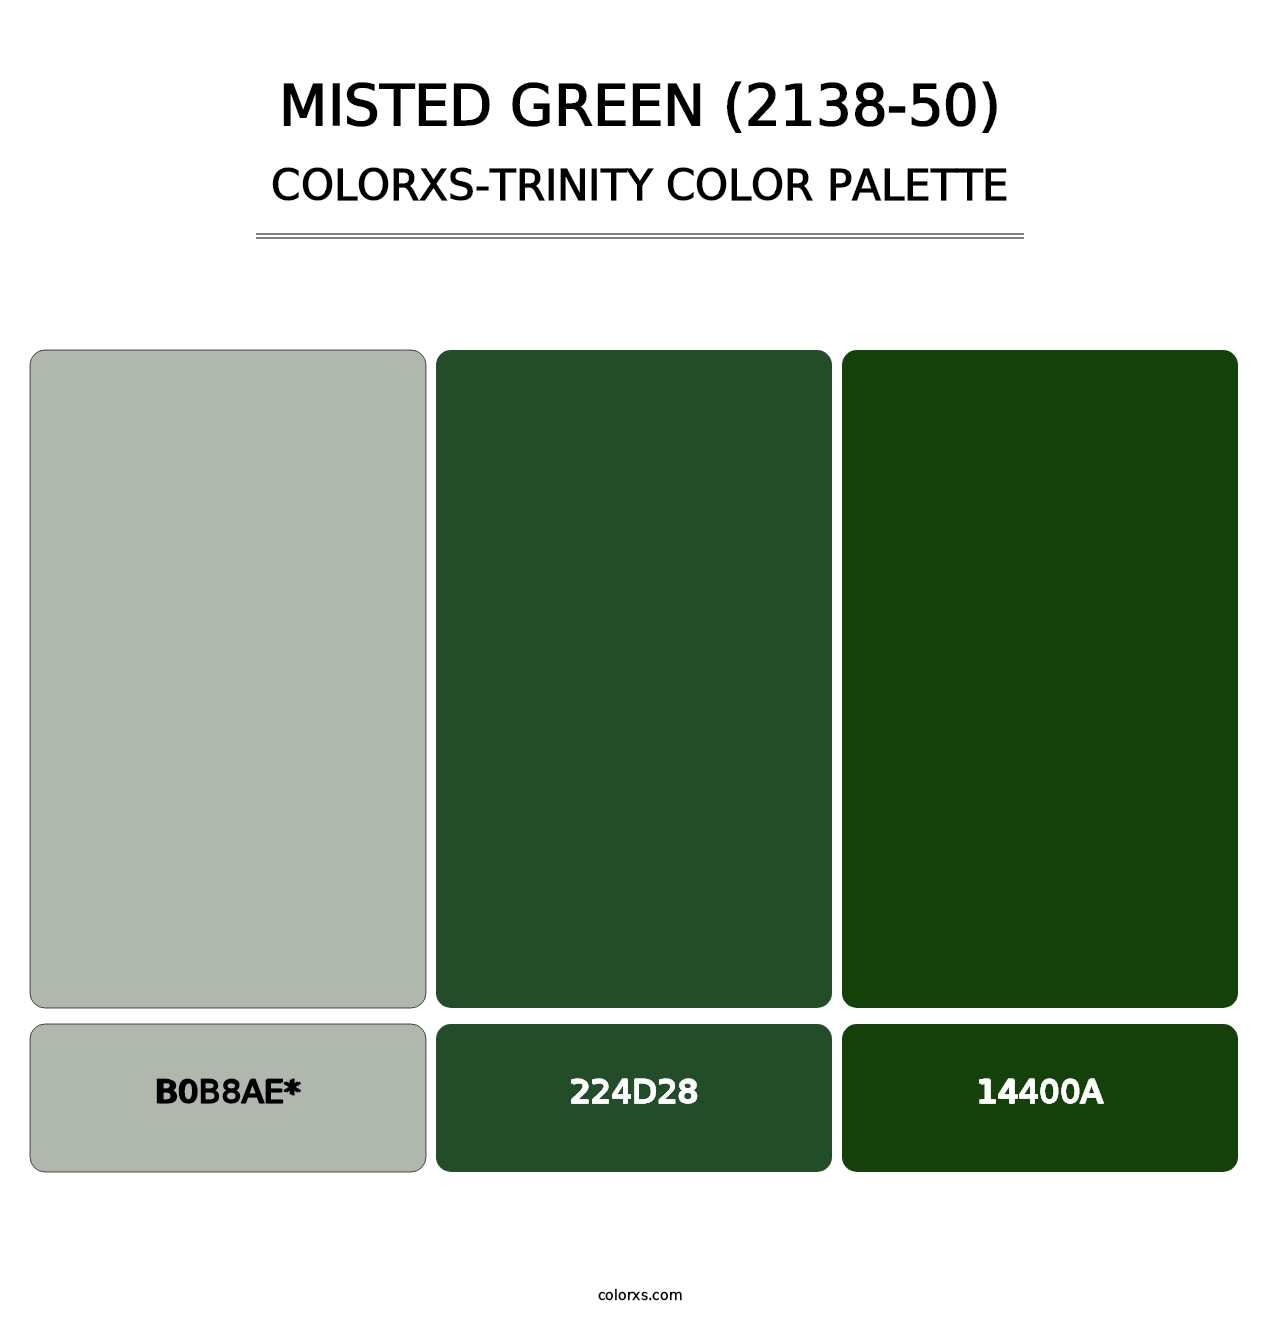 Misted Green (2138-50) - Colorxs Trinity Palette